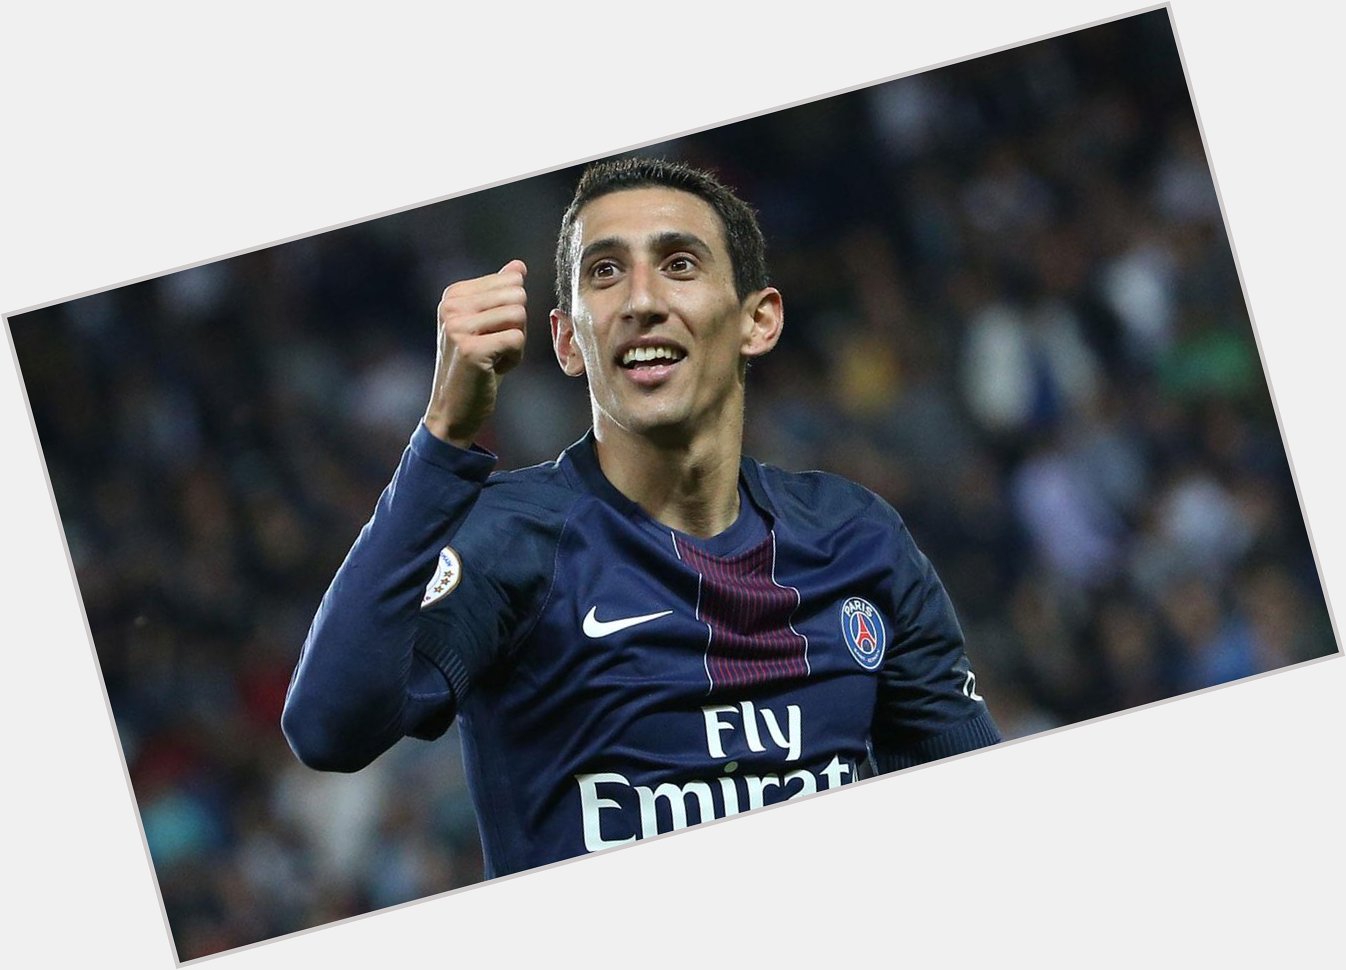 Khel Now wishes and ace Angel Di Maria a very happy birthday. The forward turns 30 today! 